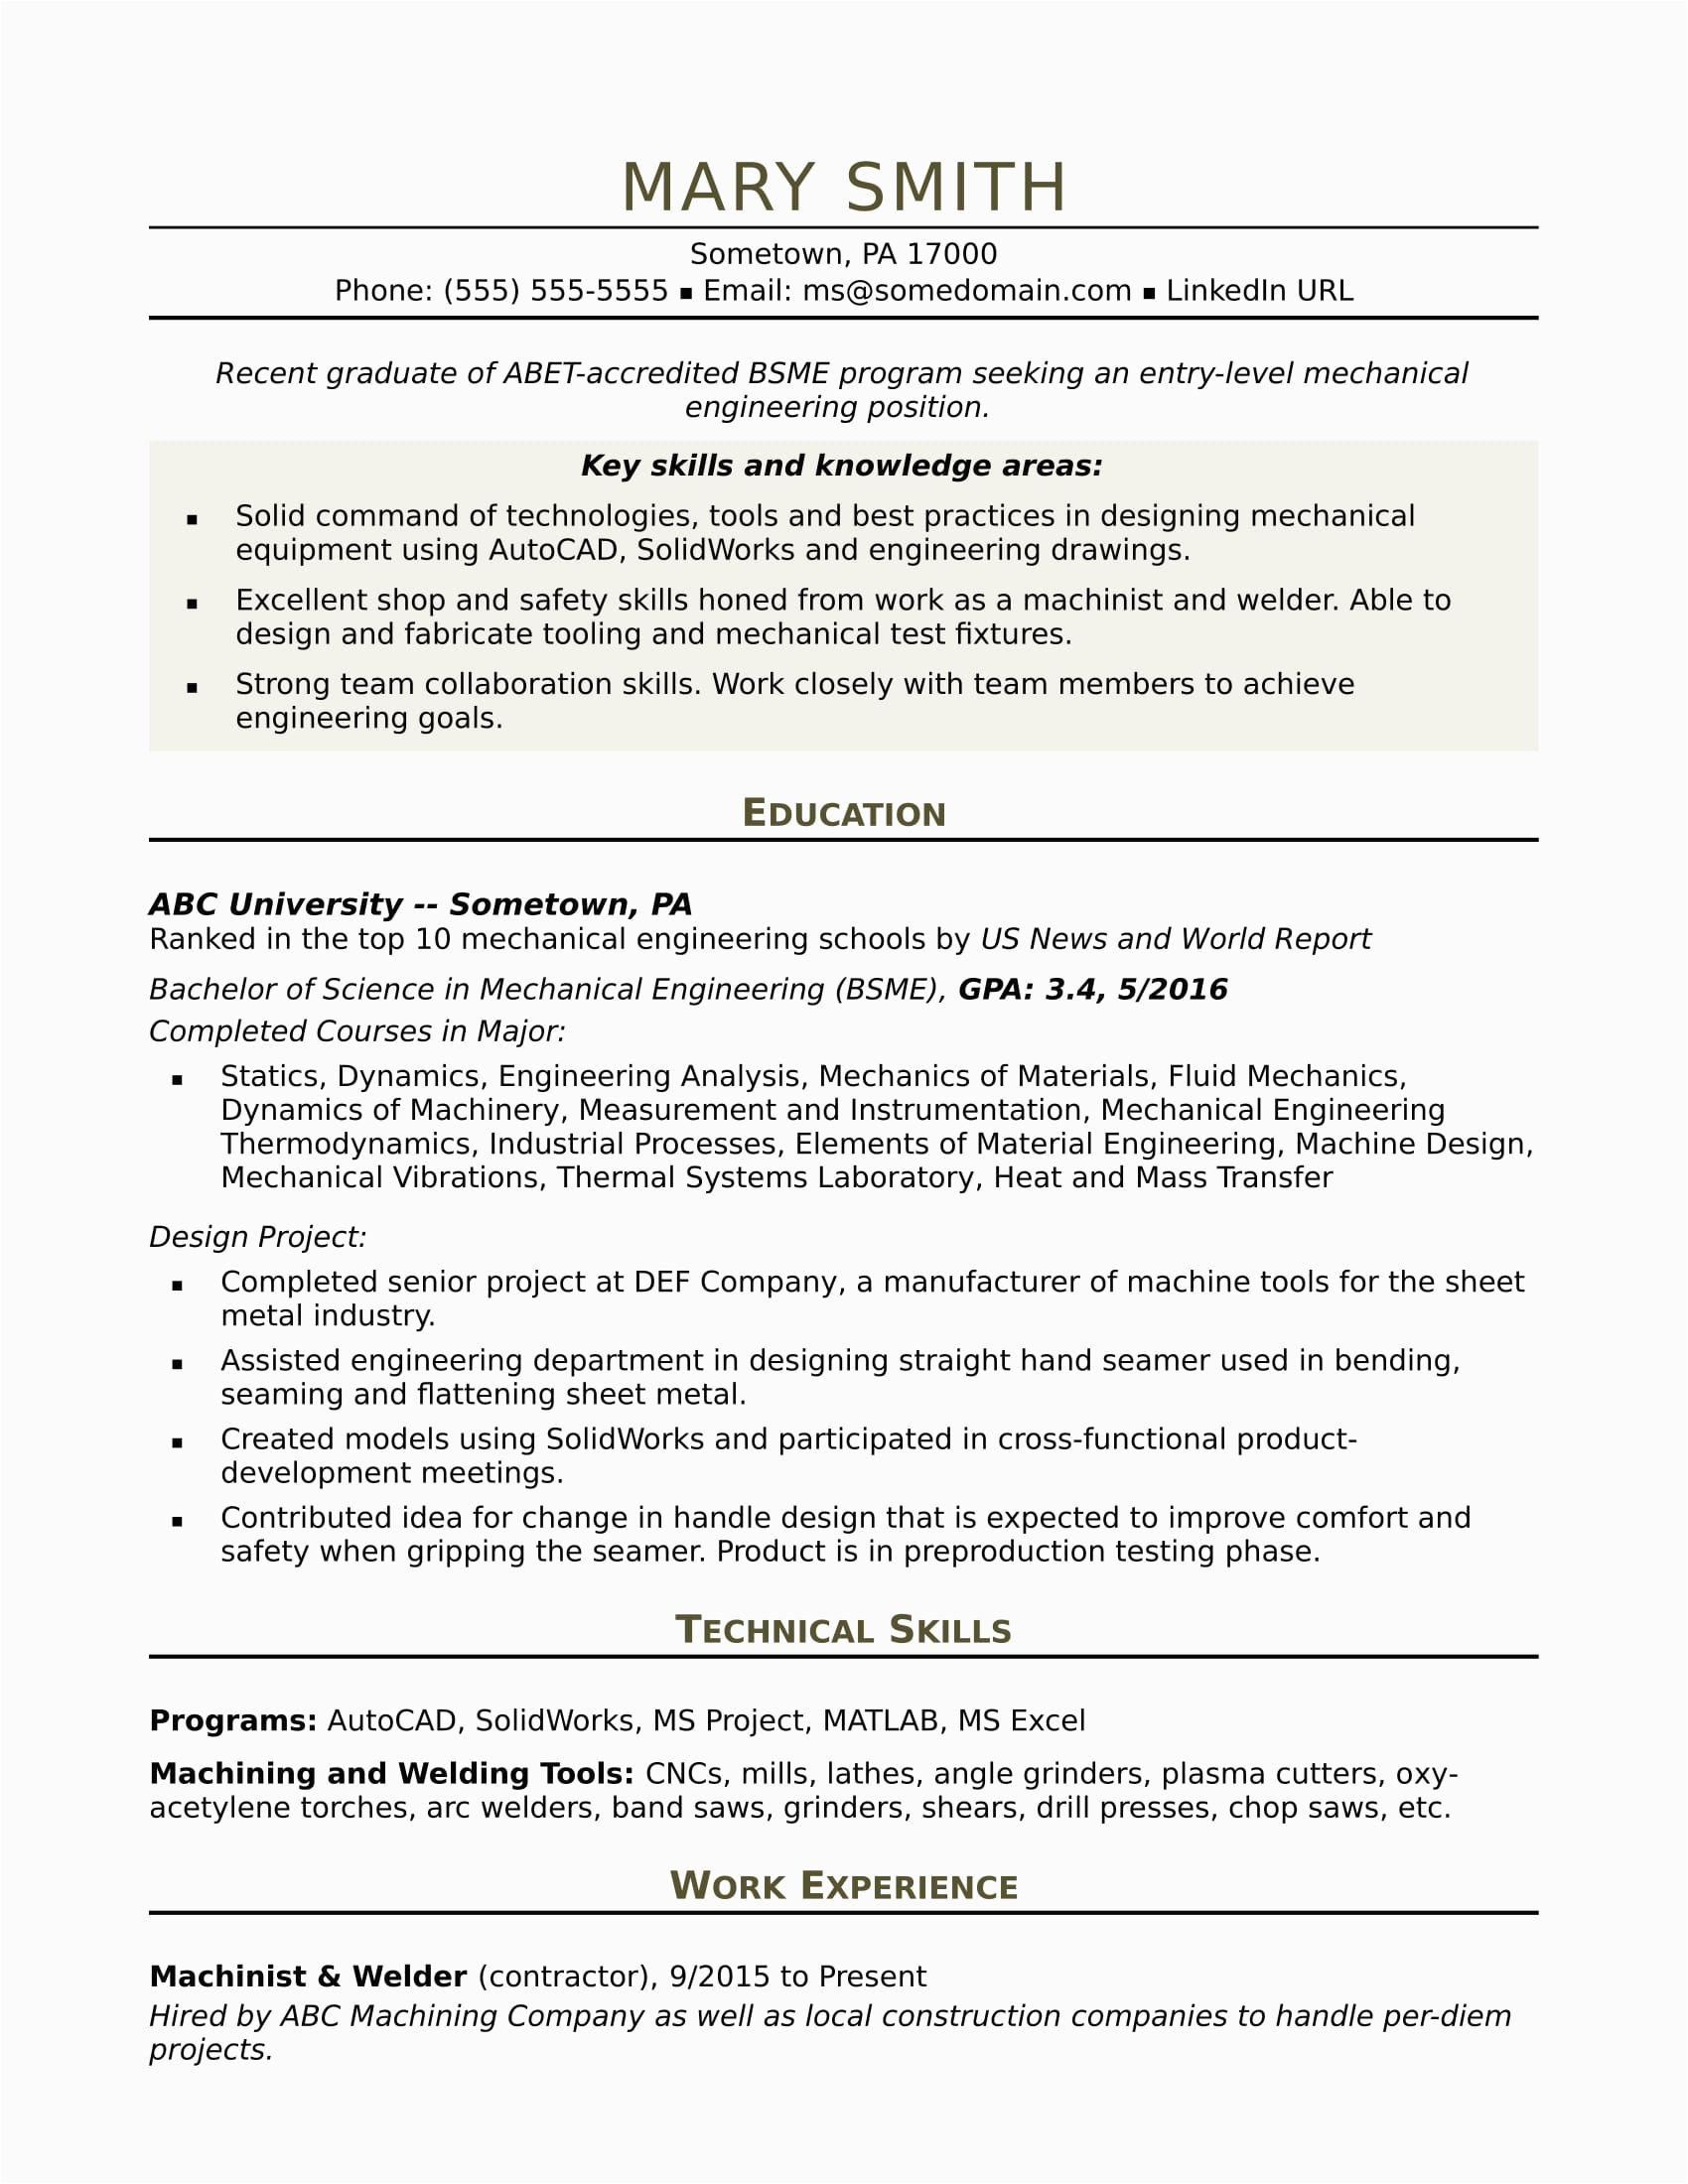 Sample Resume for Mechanical Design Engineer with Experience Sample Resume for An Entry Level Mechanical Engineer